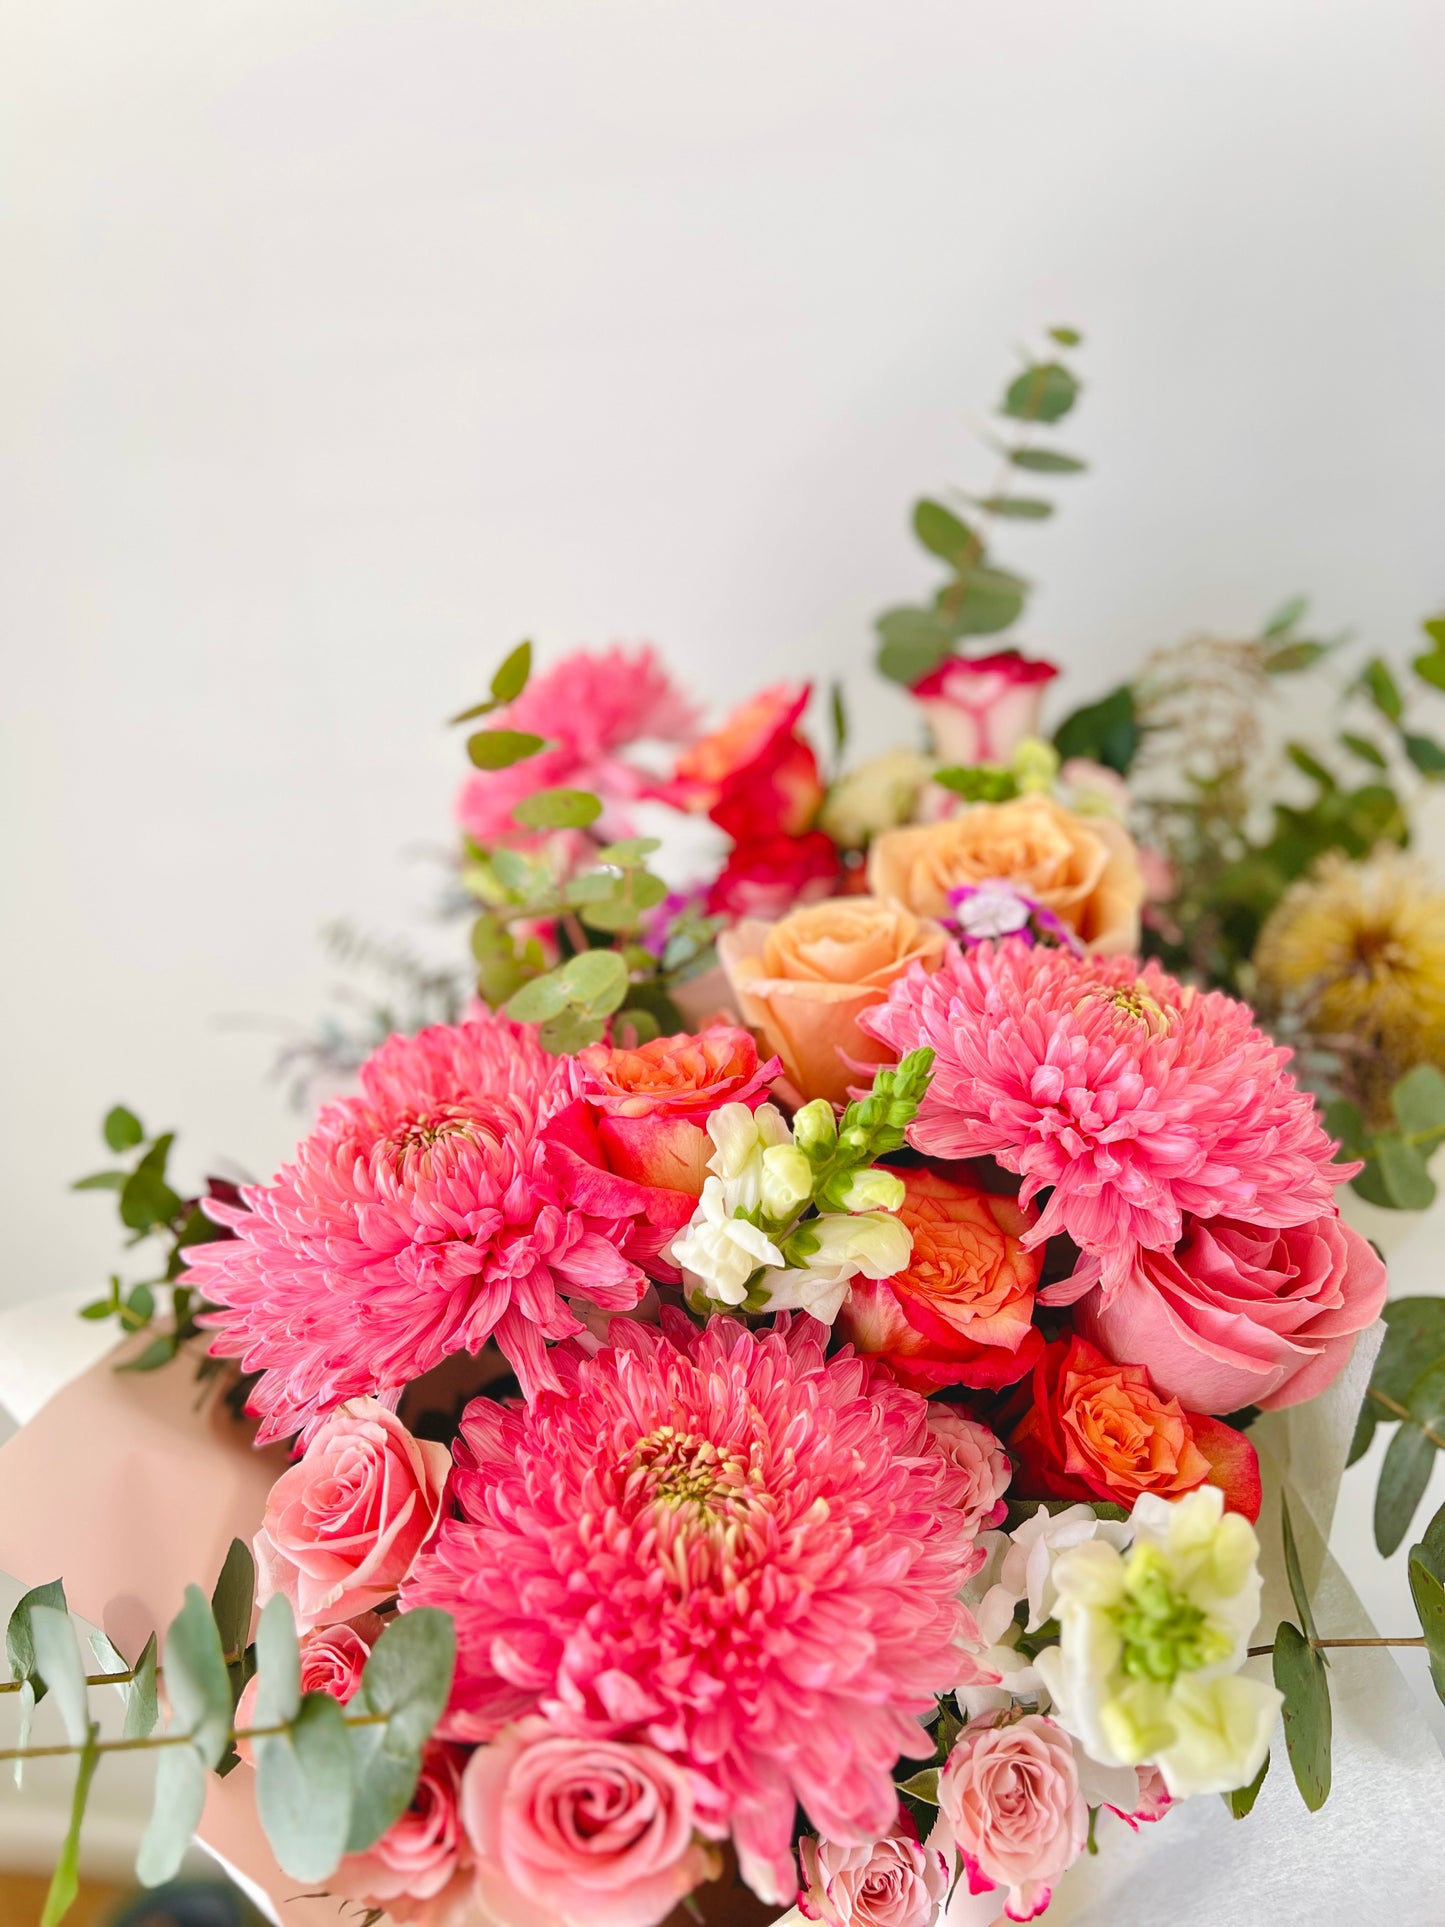 Seasonal flowers and foliages in a bouquet.